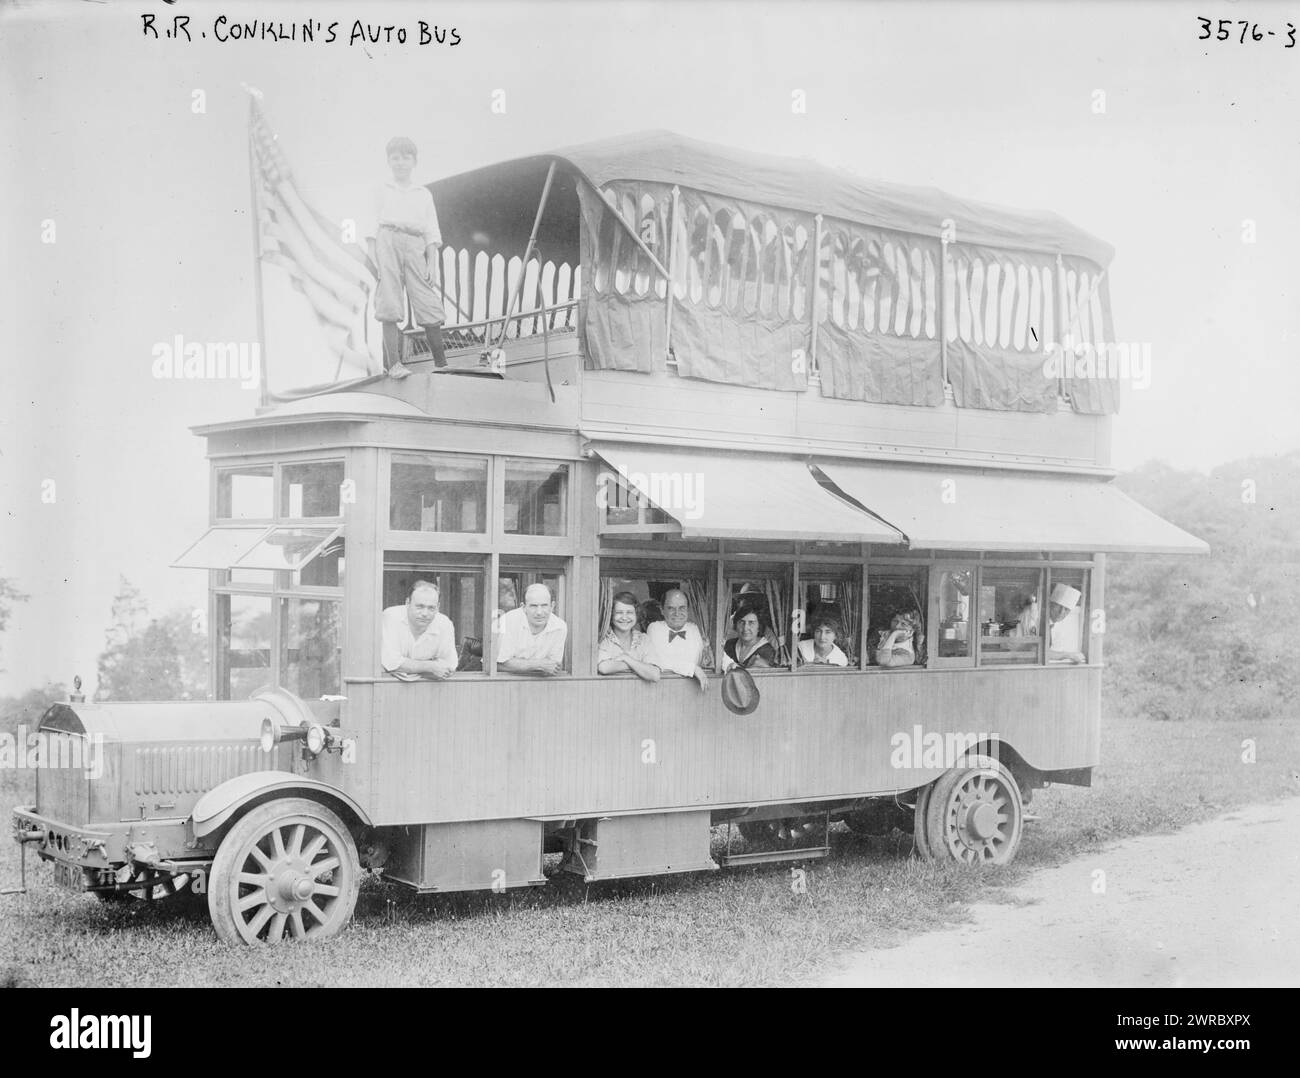 R.R. Conklin's auto bus, Photograph shows the 'land yacht' double-decker bus of Roland R. Conklin, who traveled from Huntington, Long Island to Chicago in 1915., 1915, Double-decker buses, Glass negatives, 1 negative: glass Stock Photo